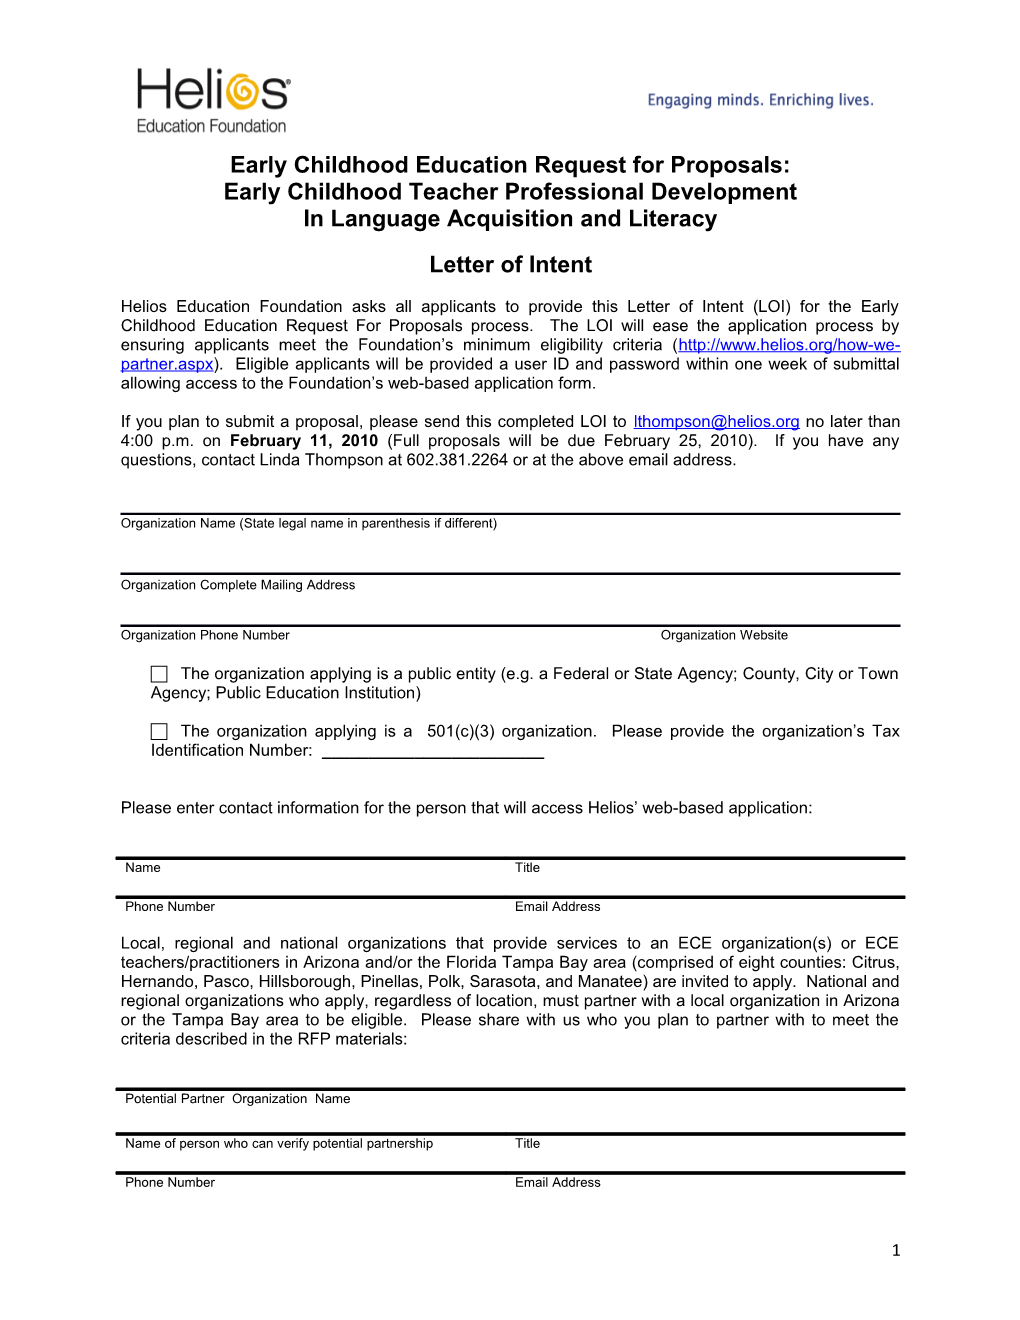 Early Childhood Education Request for Proposals